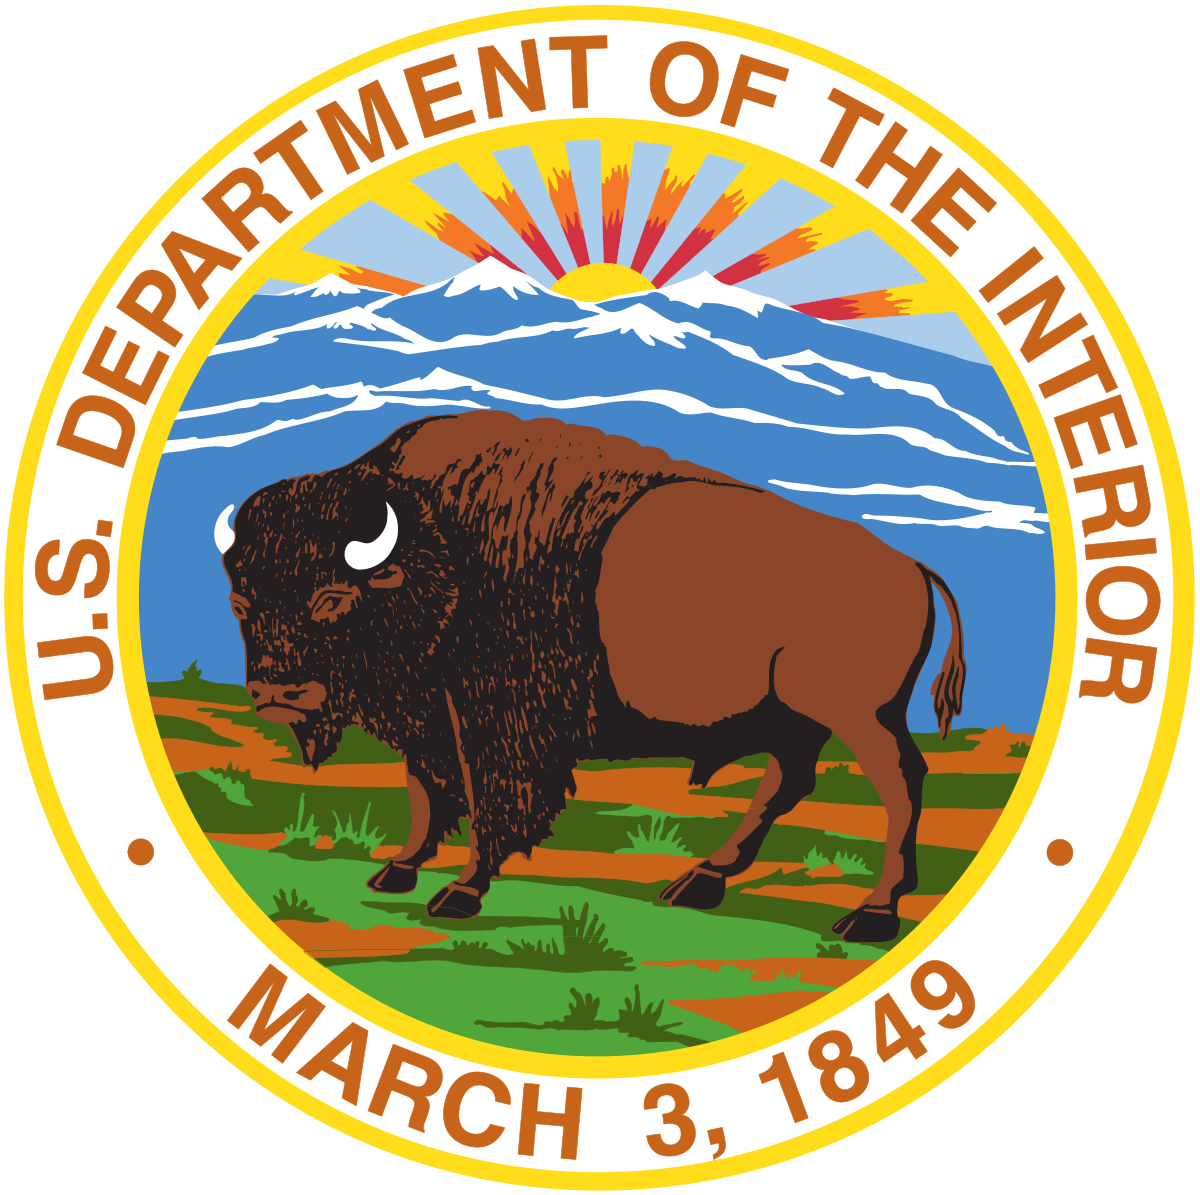 Secretary of the Interior to Participate in Planning